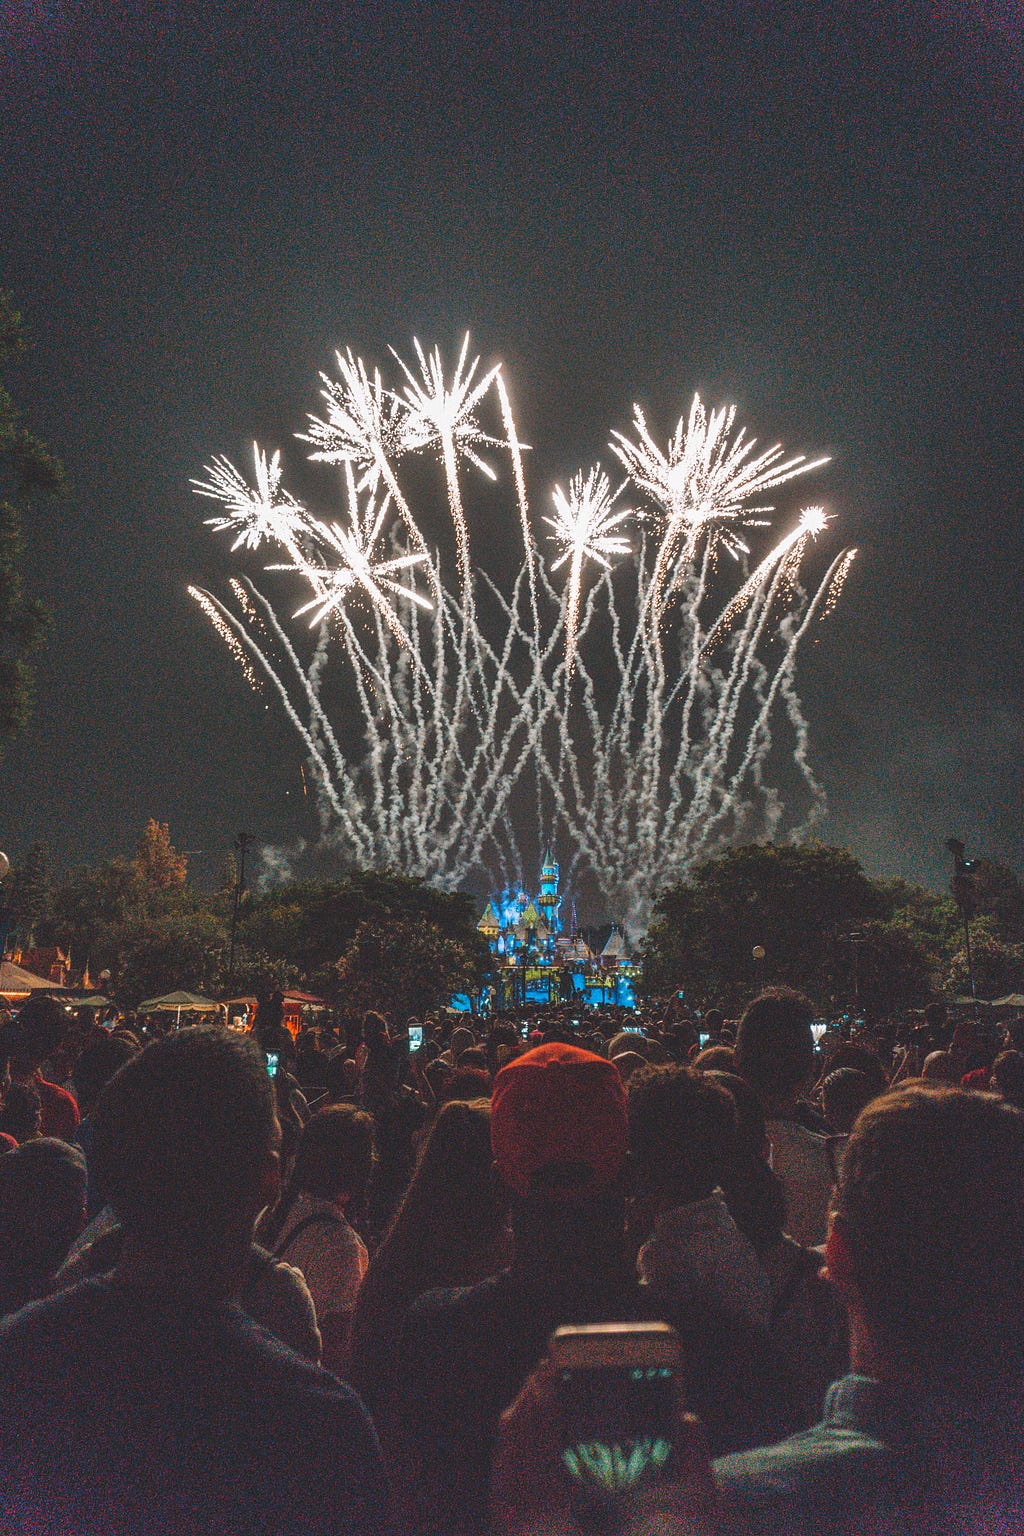 Stop Filming the Fireworks at Disney (and Fireworks in General)